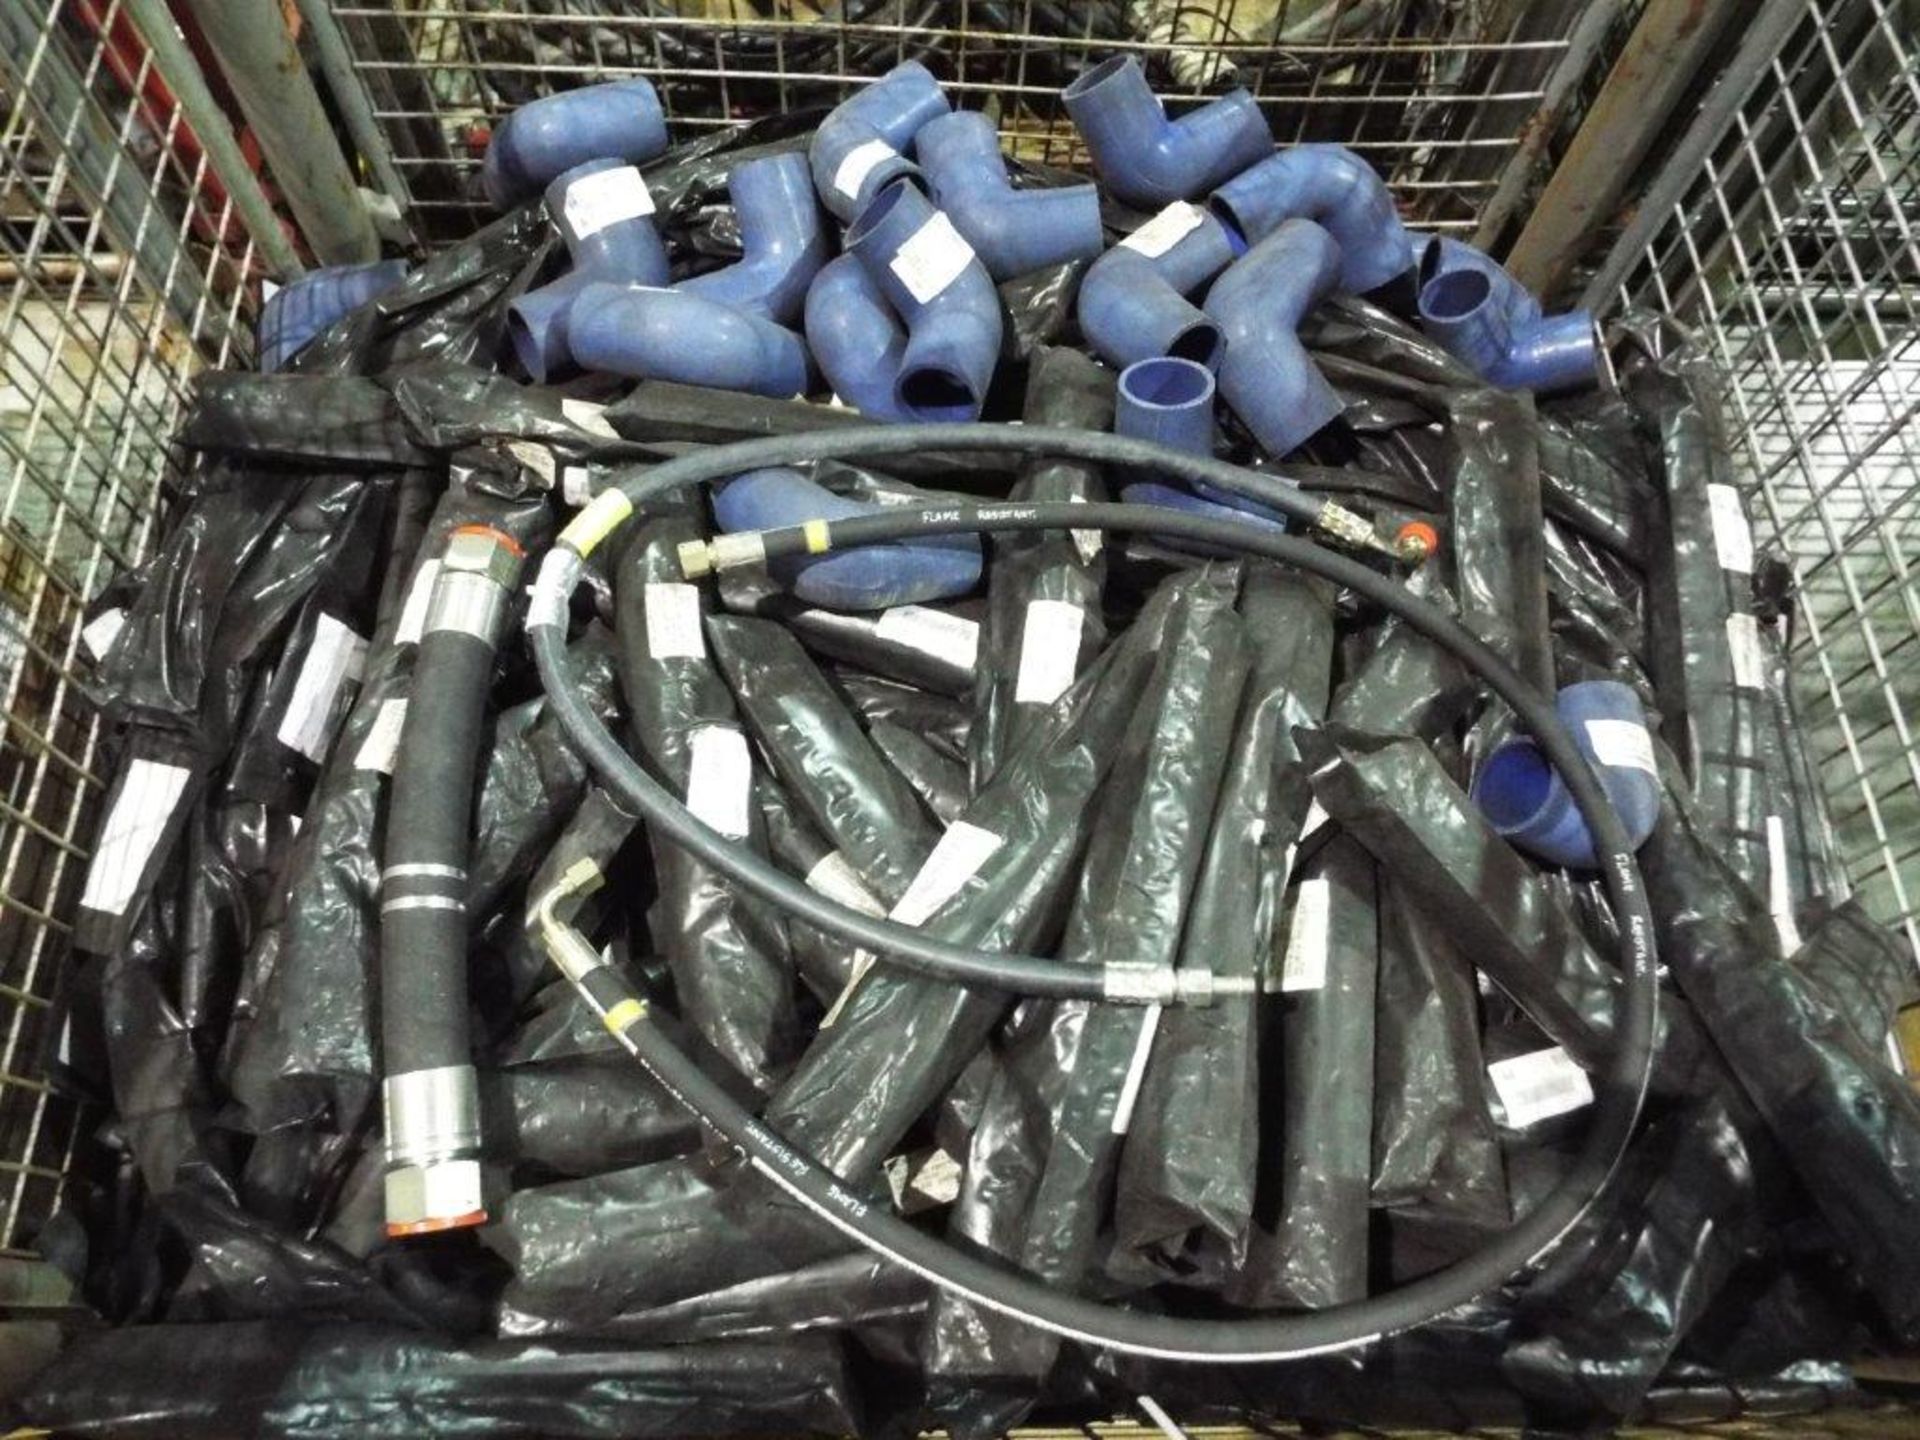 Mixed Stillage of Hydraulic and Rubber Hoses